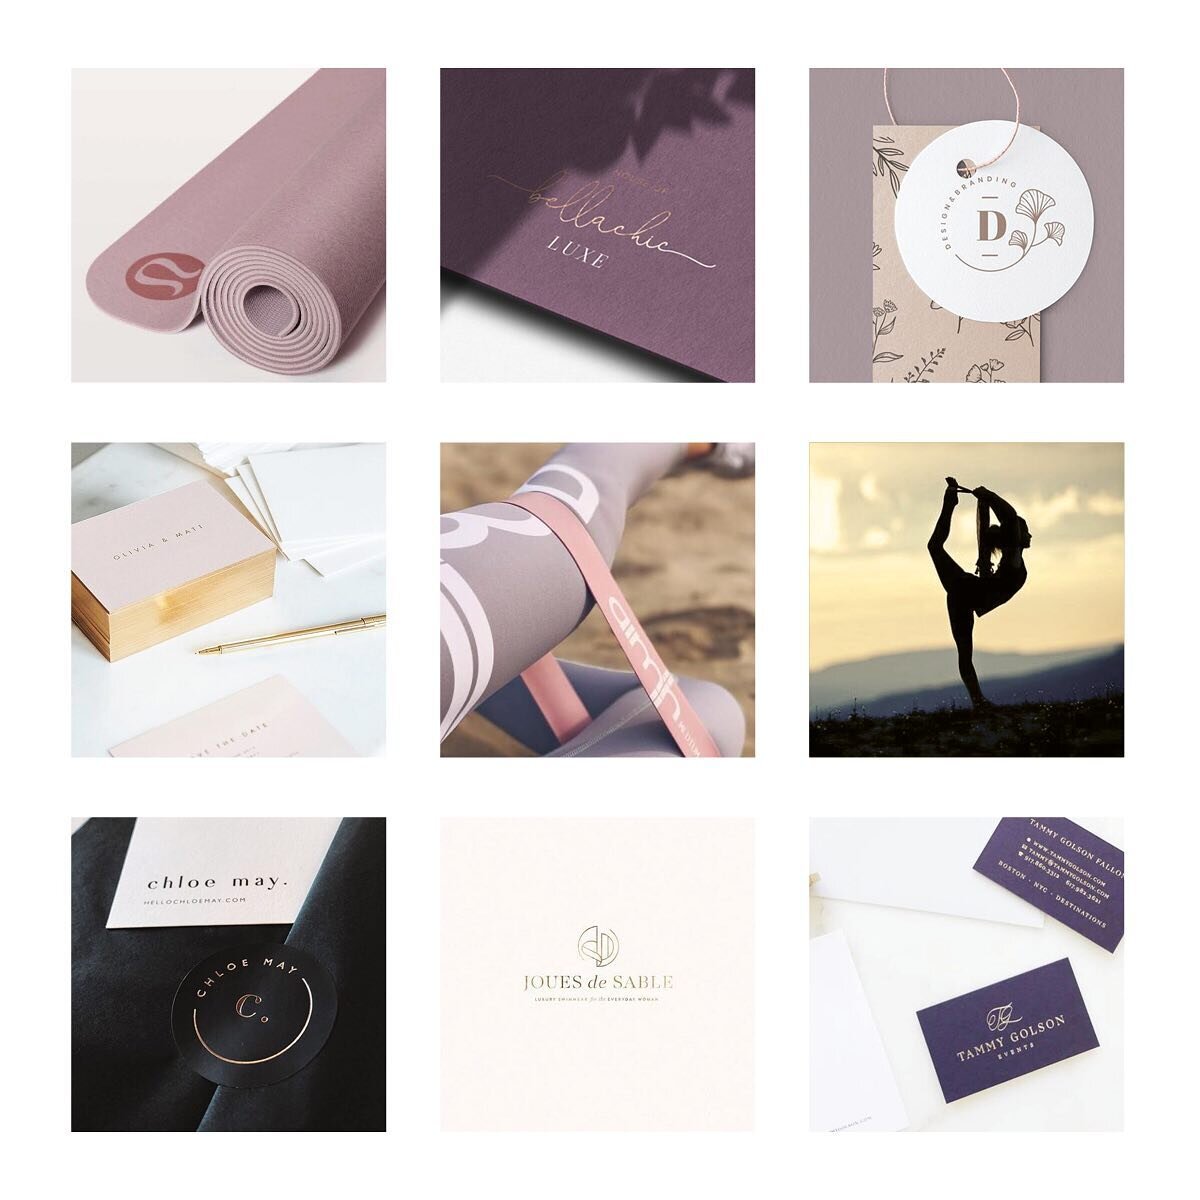 A luxe boutique vibe for a pole dance, aerial &amp; fitness studio done at the beginning of the year. Here&rsquo;s a glimpse of the moodboard and initial concepts. The dance outlines were inspired by actual images of my client who is so talented! The